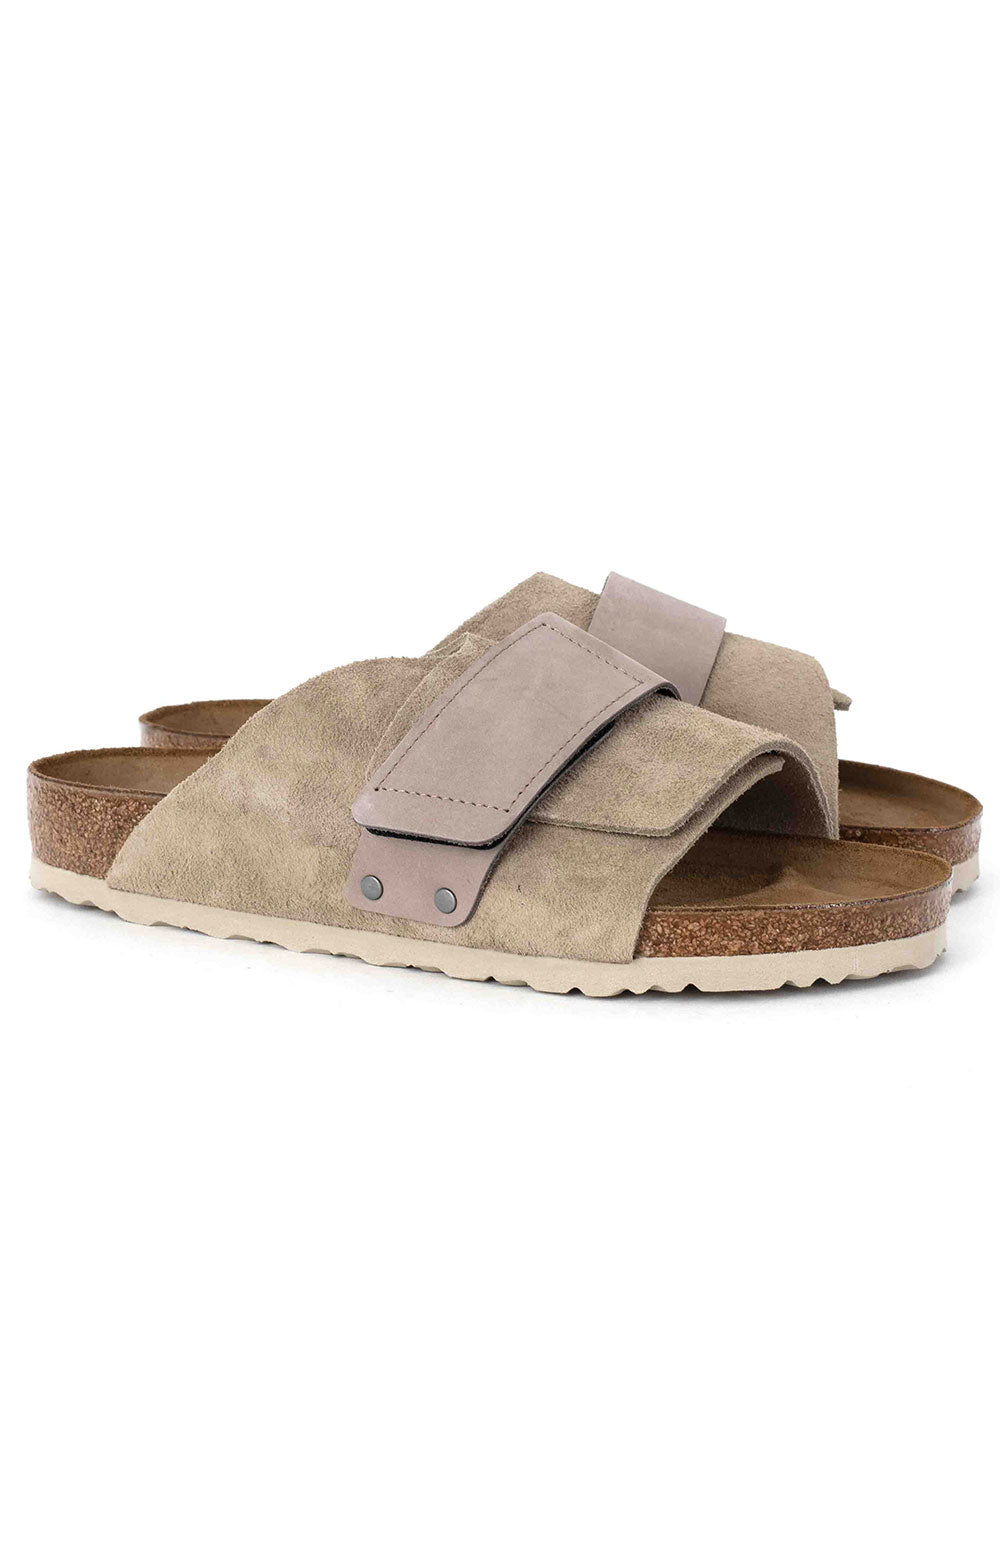 Birkenstock Kyoto Sandals Taupe BR1015572 for women walking on the beach